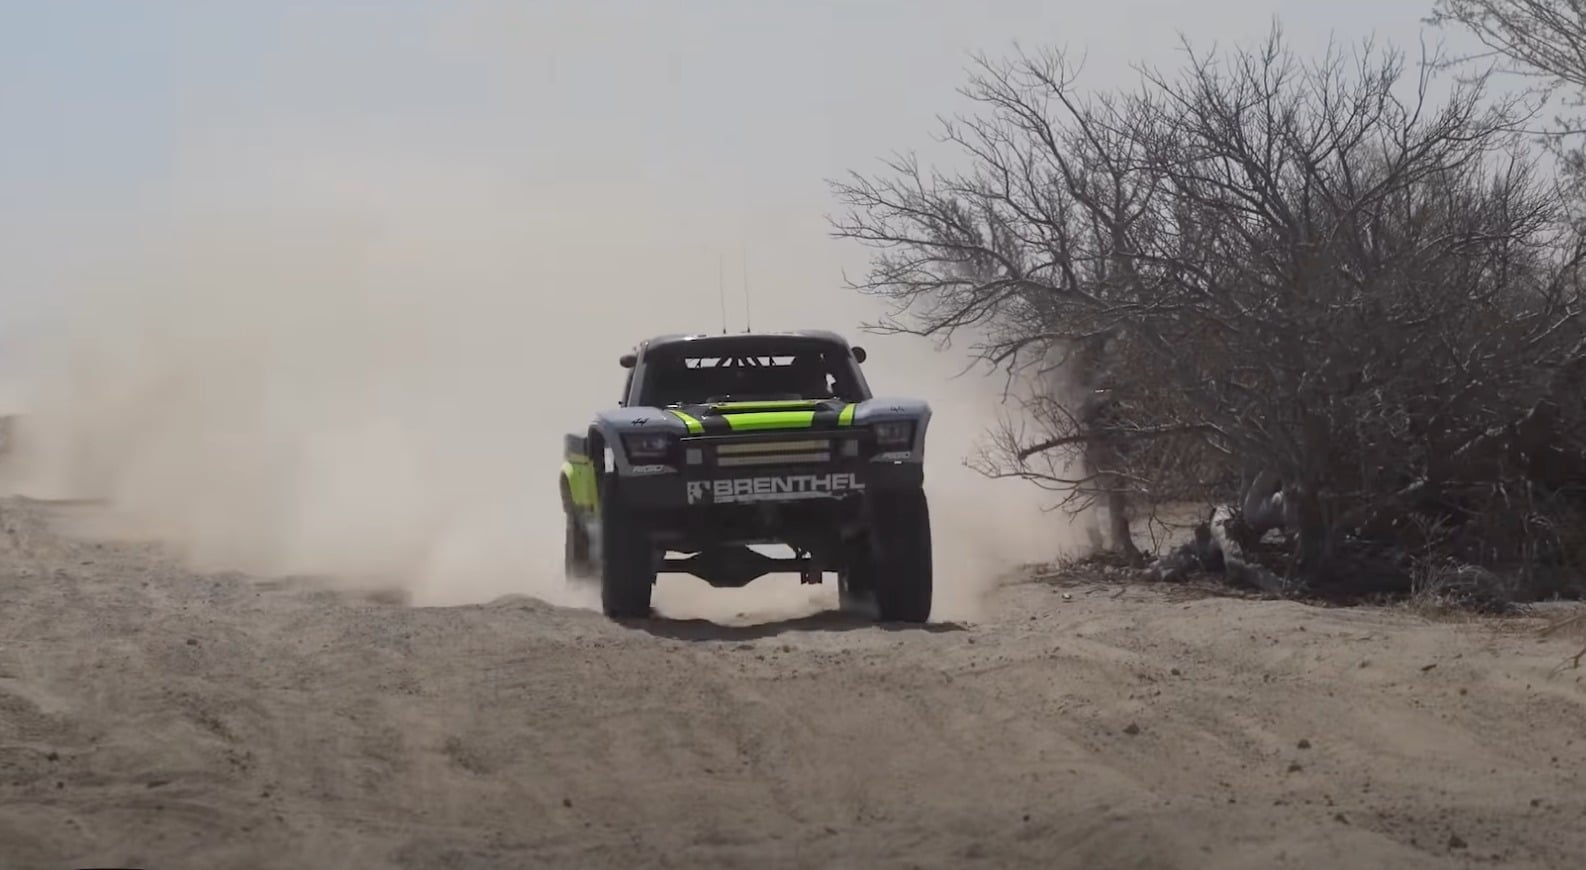 A trophy truck racing down Zoo Road, throwing dust and clouds of dirt up behind it.